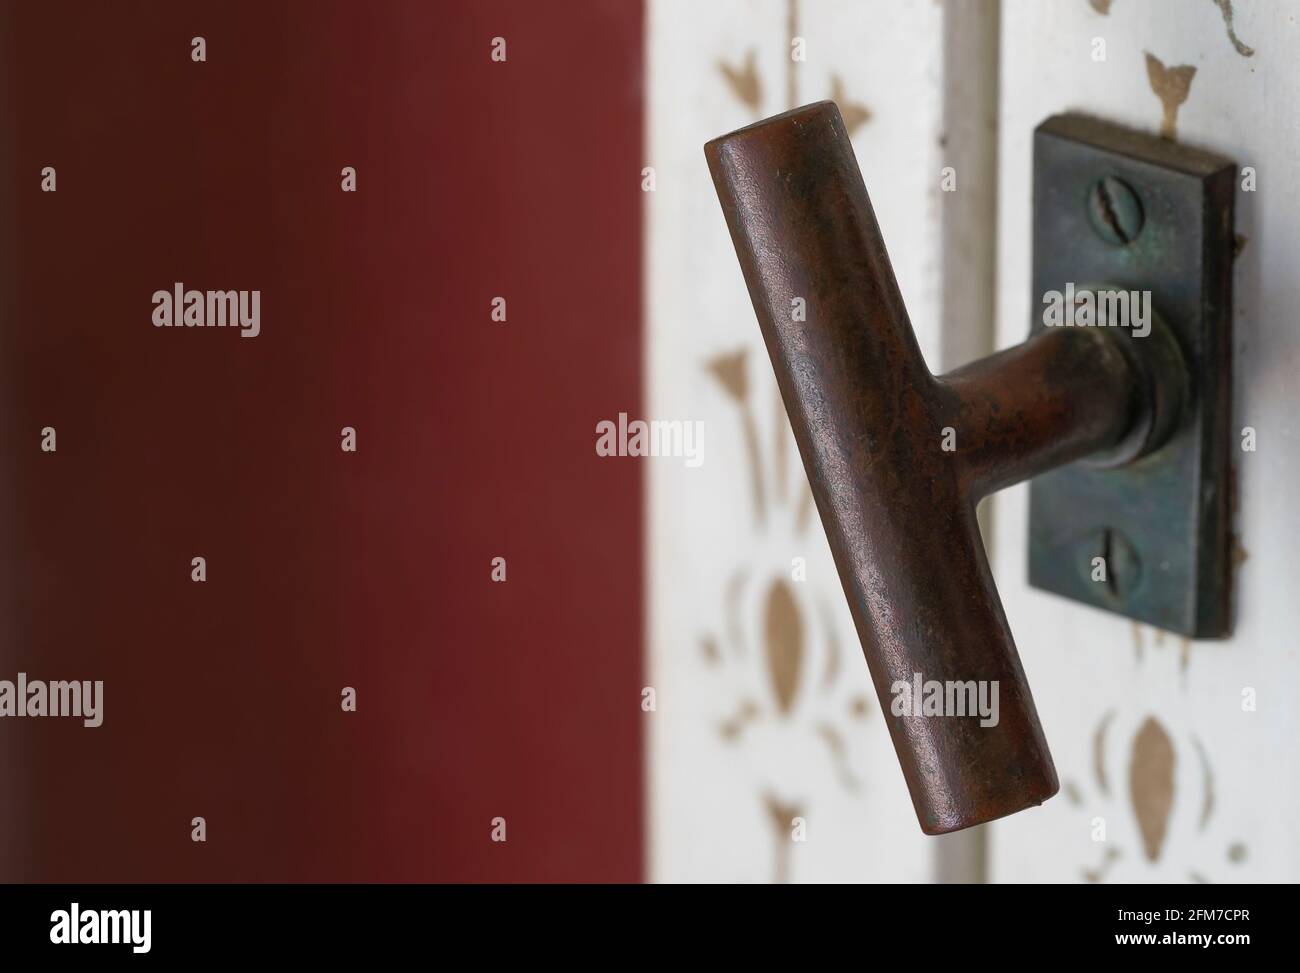 Background image of metal handle of an old white window and a part of the facade in burgundy red Stock Photo